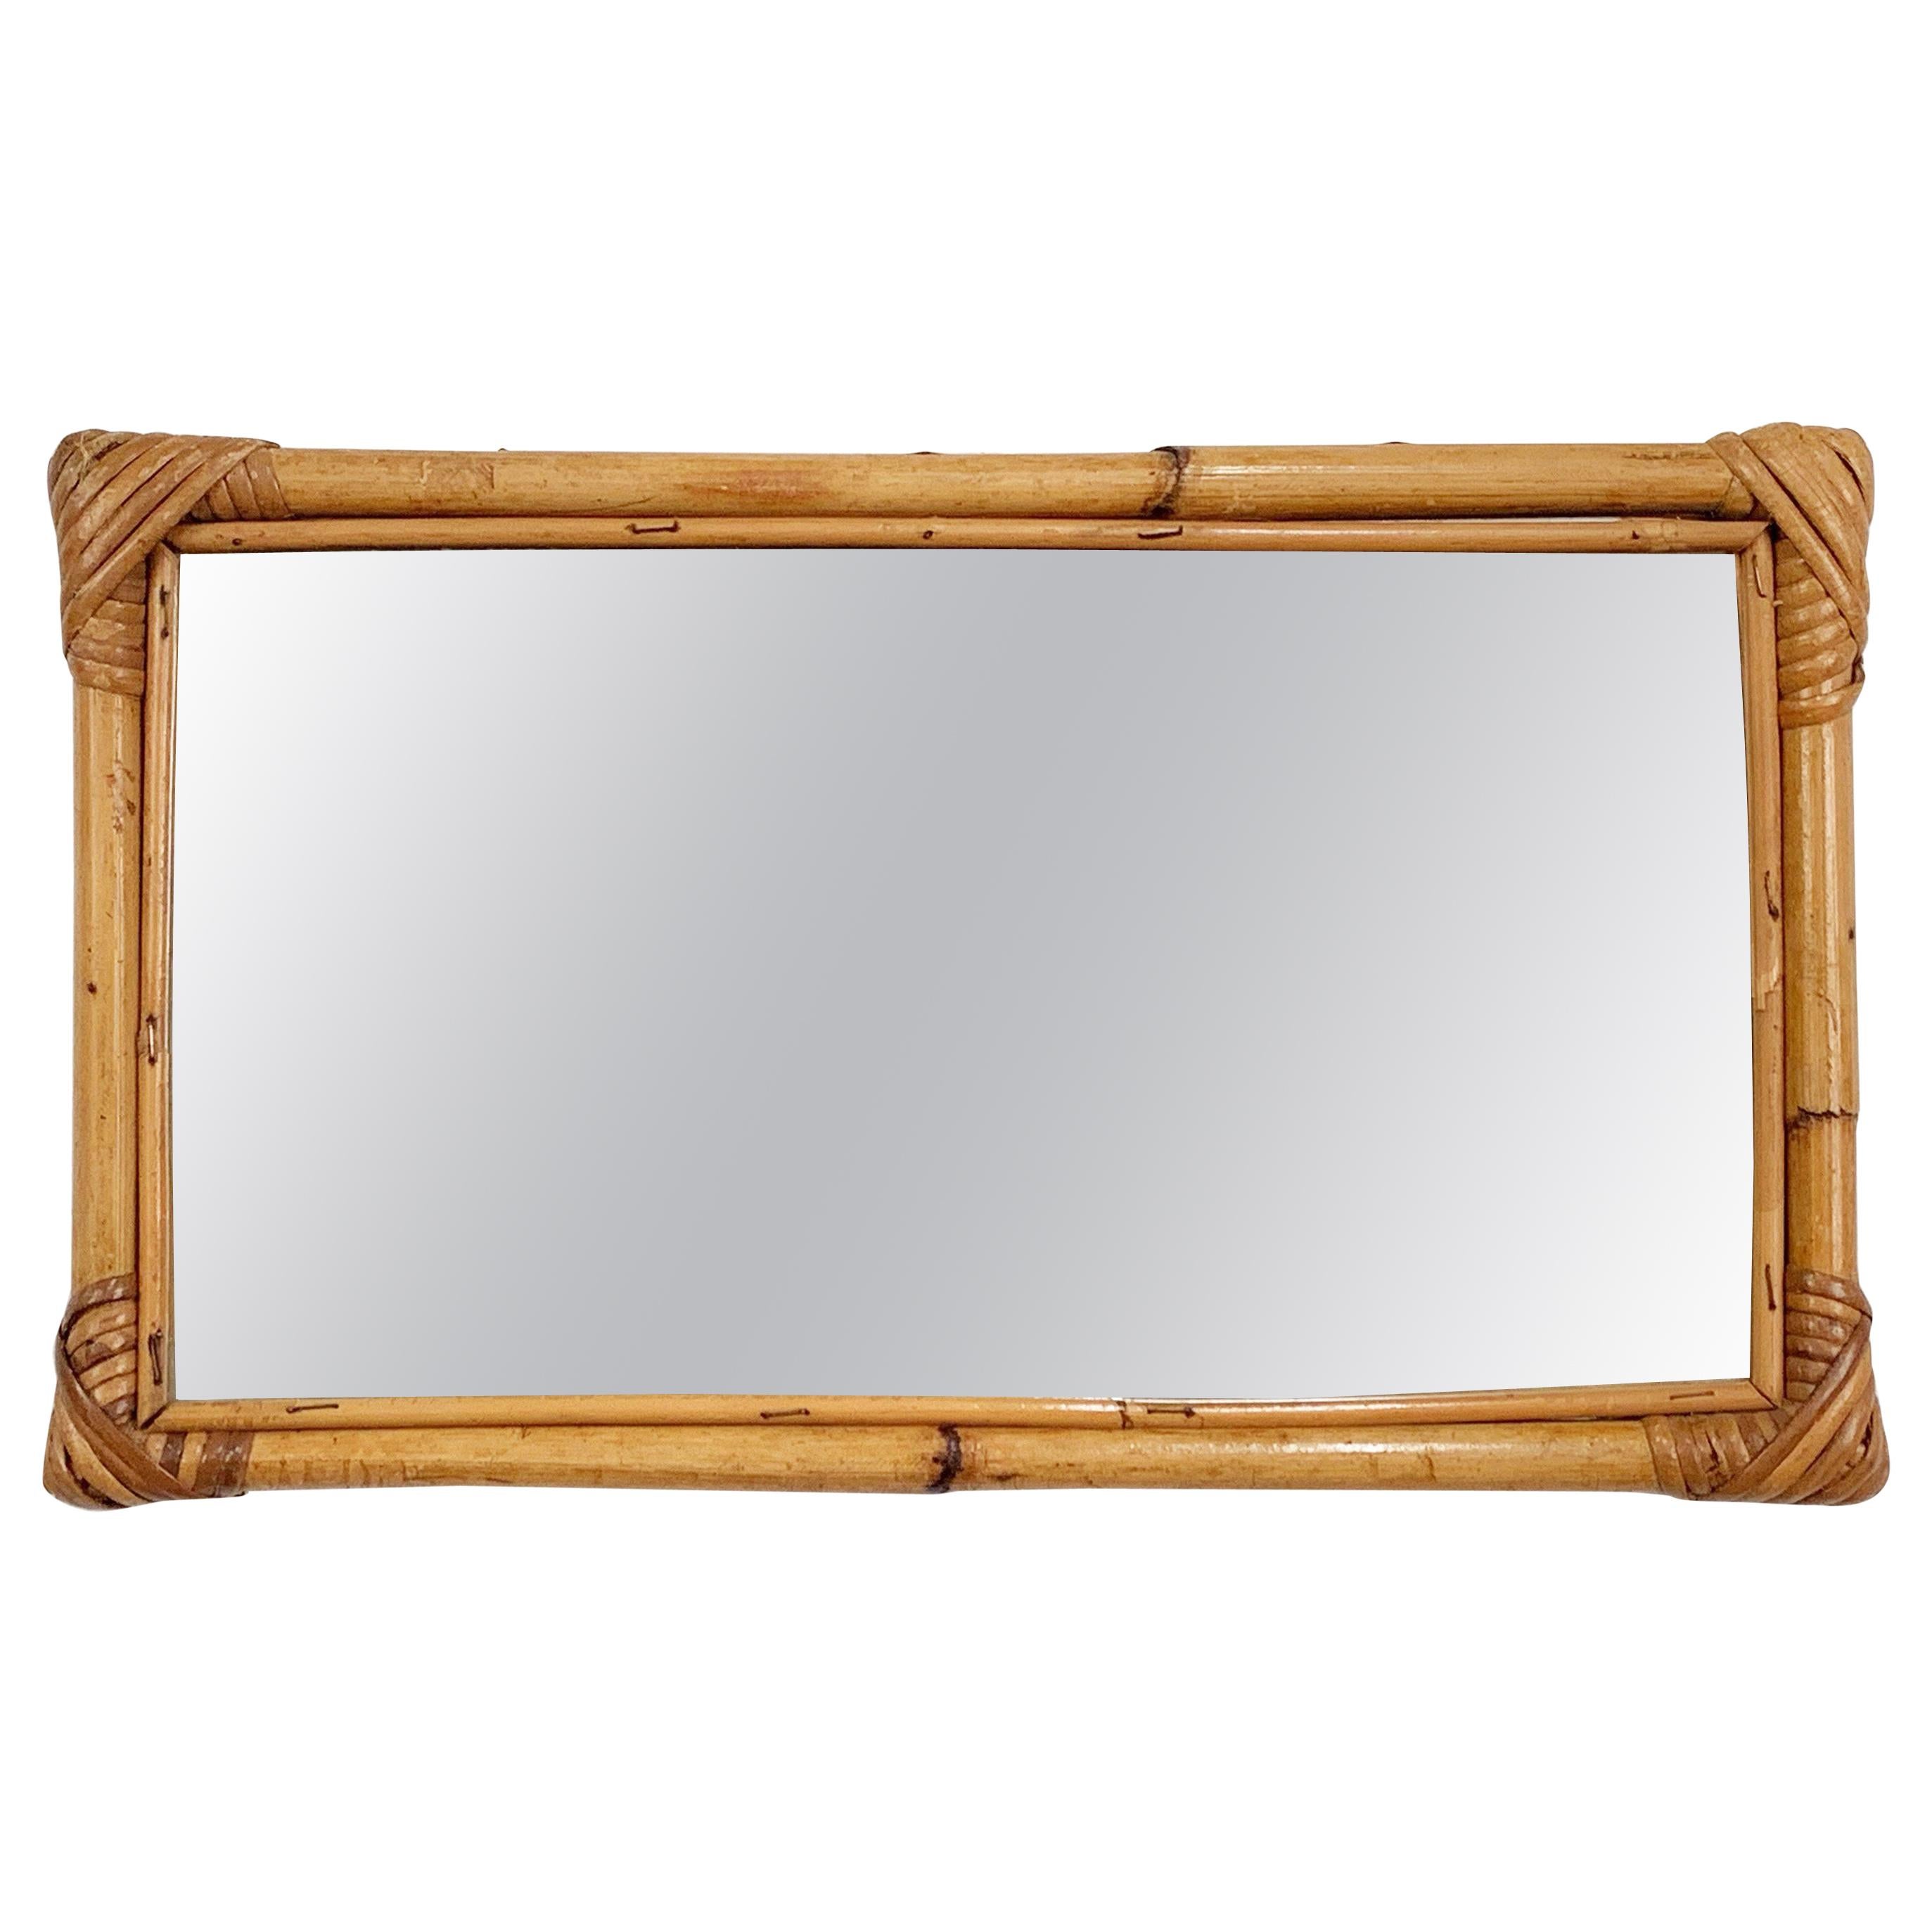 Rectangular Mirror with Bamboo Wicker Woven Frame from the 1970s, Italy